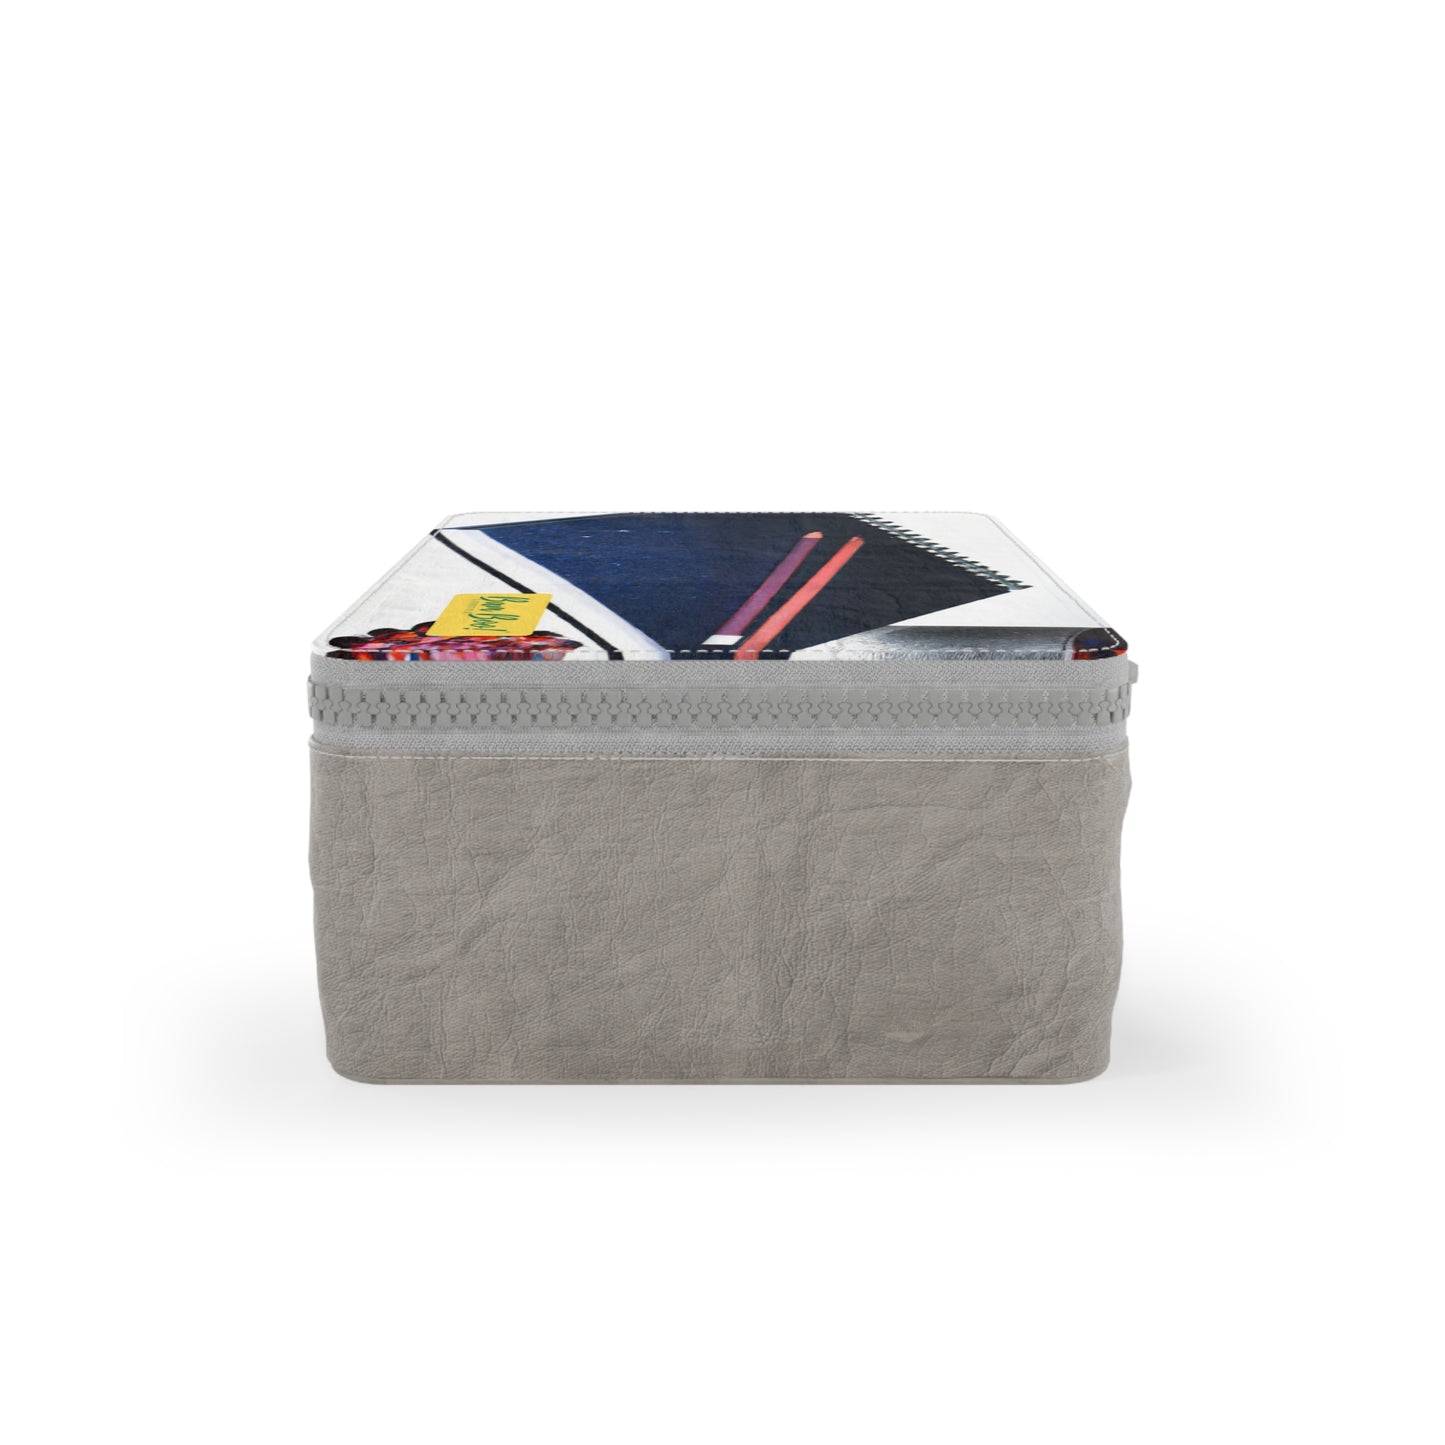 "A Memory In Art: Capturing Experiences Through Color and Material" - Bam Boo! Lifestyle Eco-friendly Paper Lunch Bag